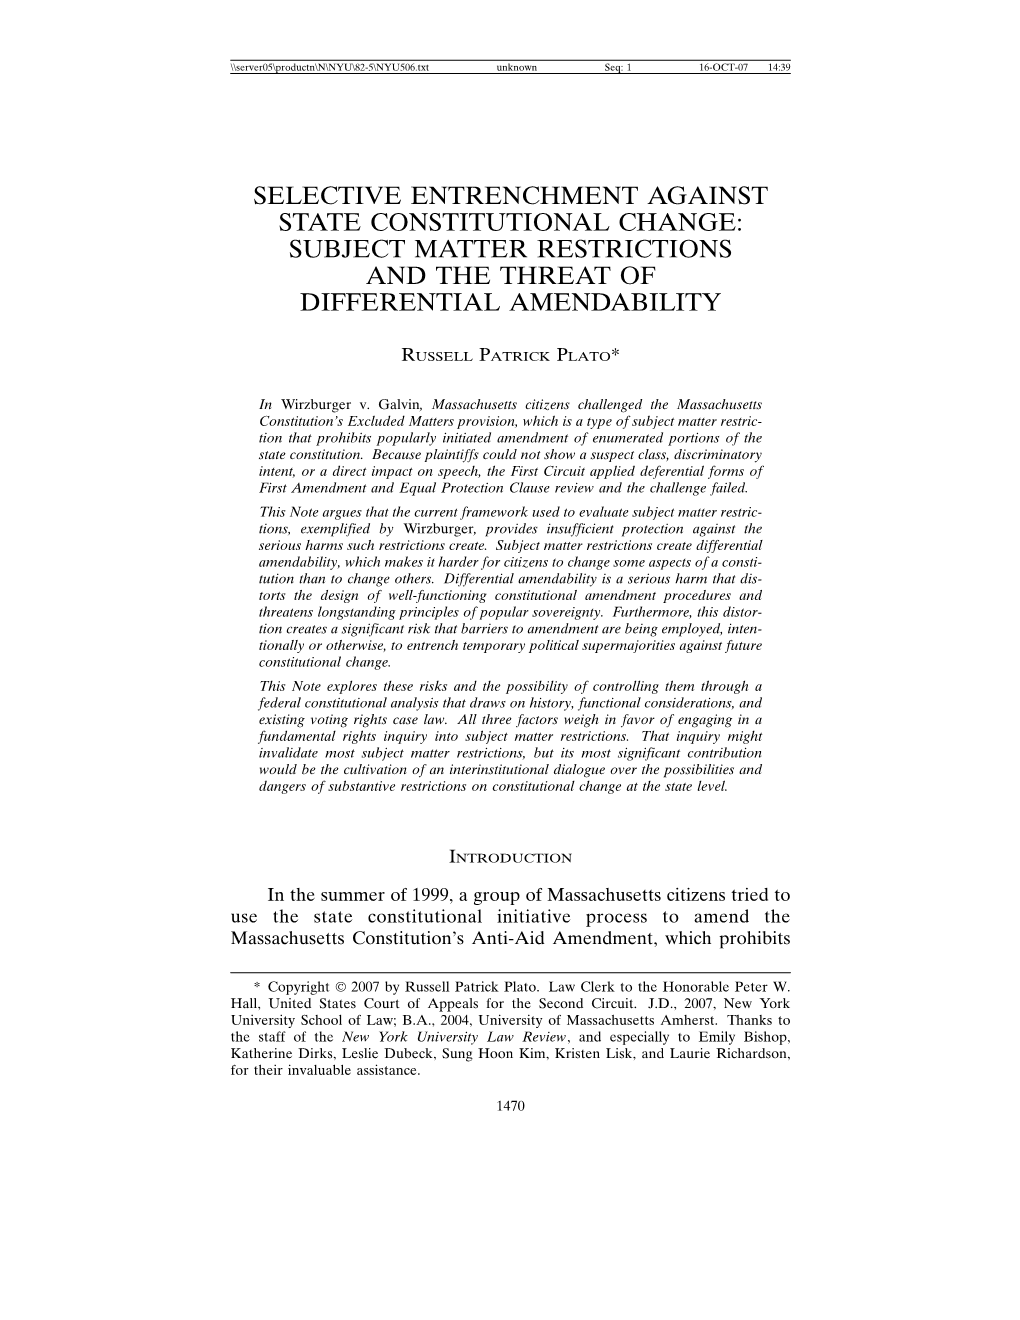 Subject Matter Restrictions and the Threat of Differential Amendability